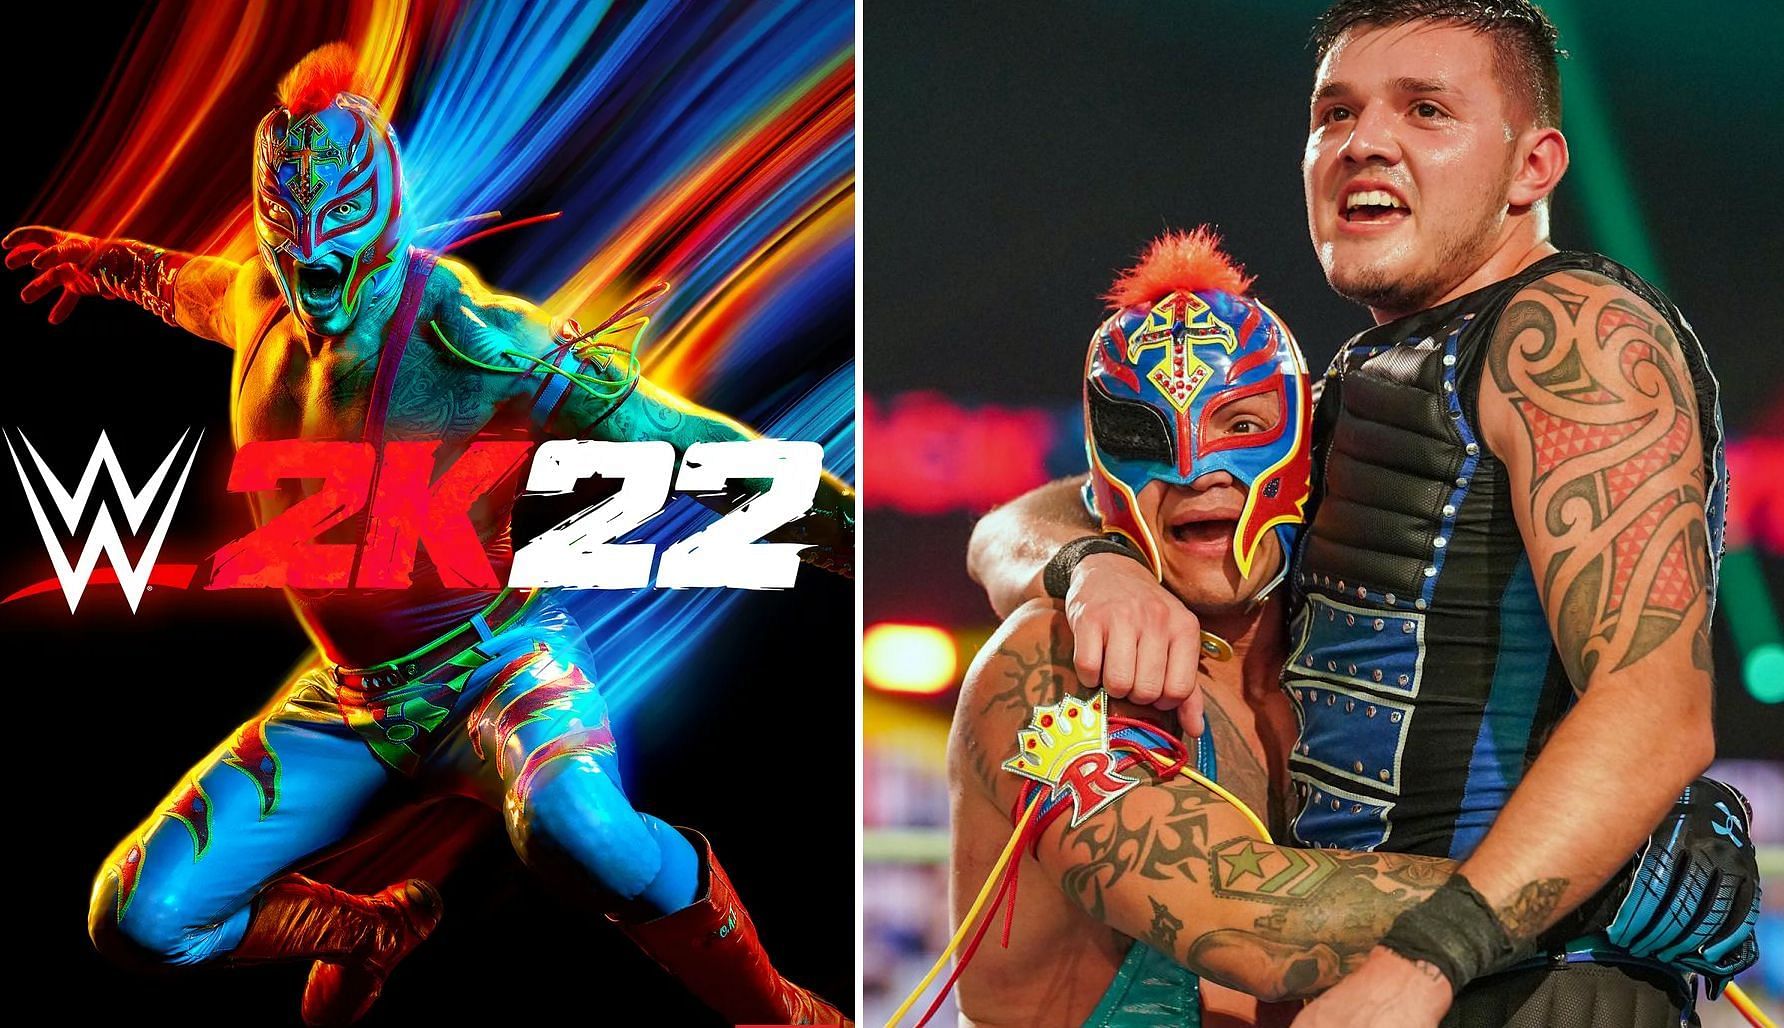 Rey Mysterio on the WWE 2K22 cover; Dominik with his father, Rey Mysterio